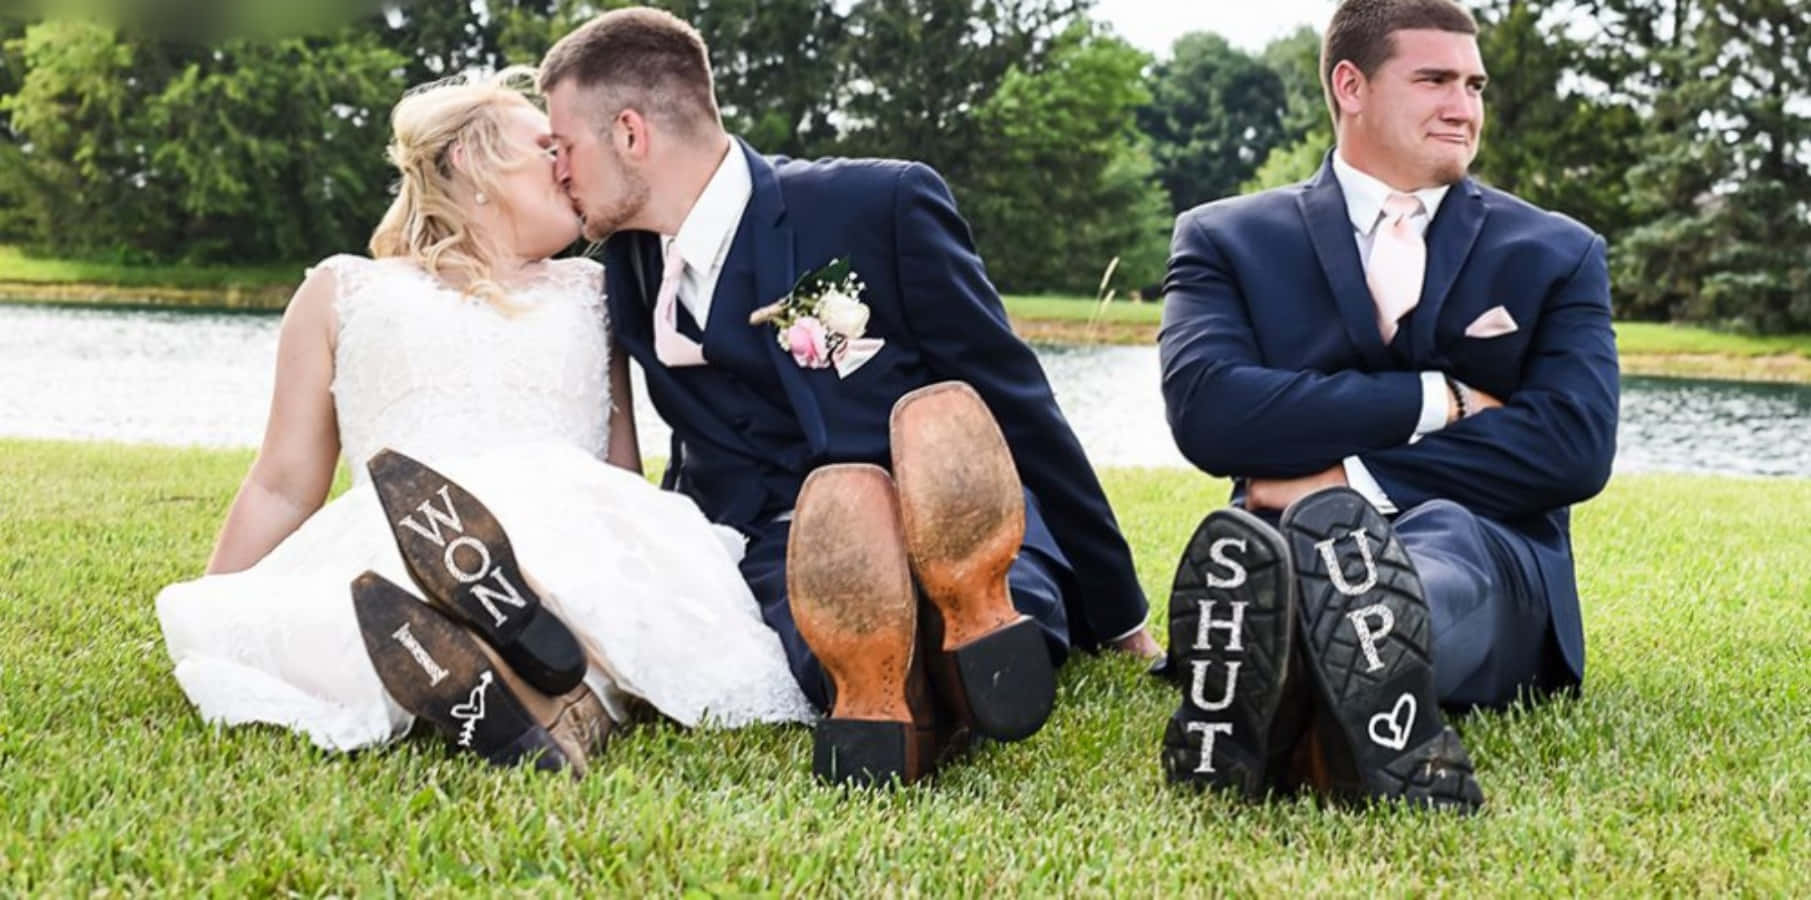 A Bride And Groom Kissing In The Grass